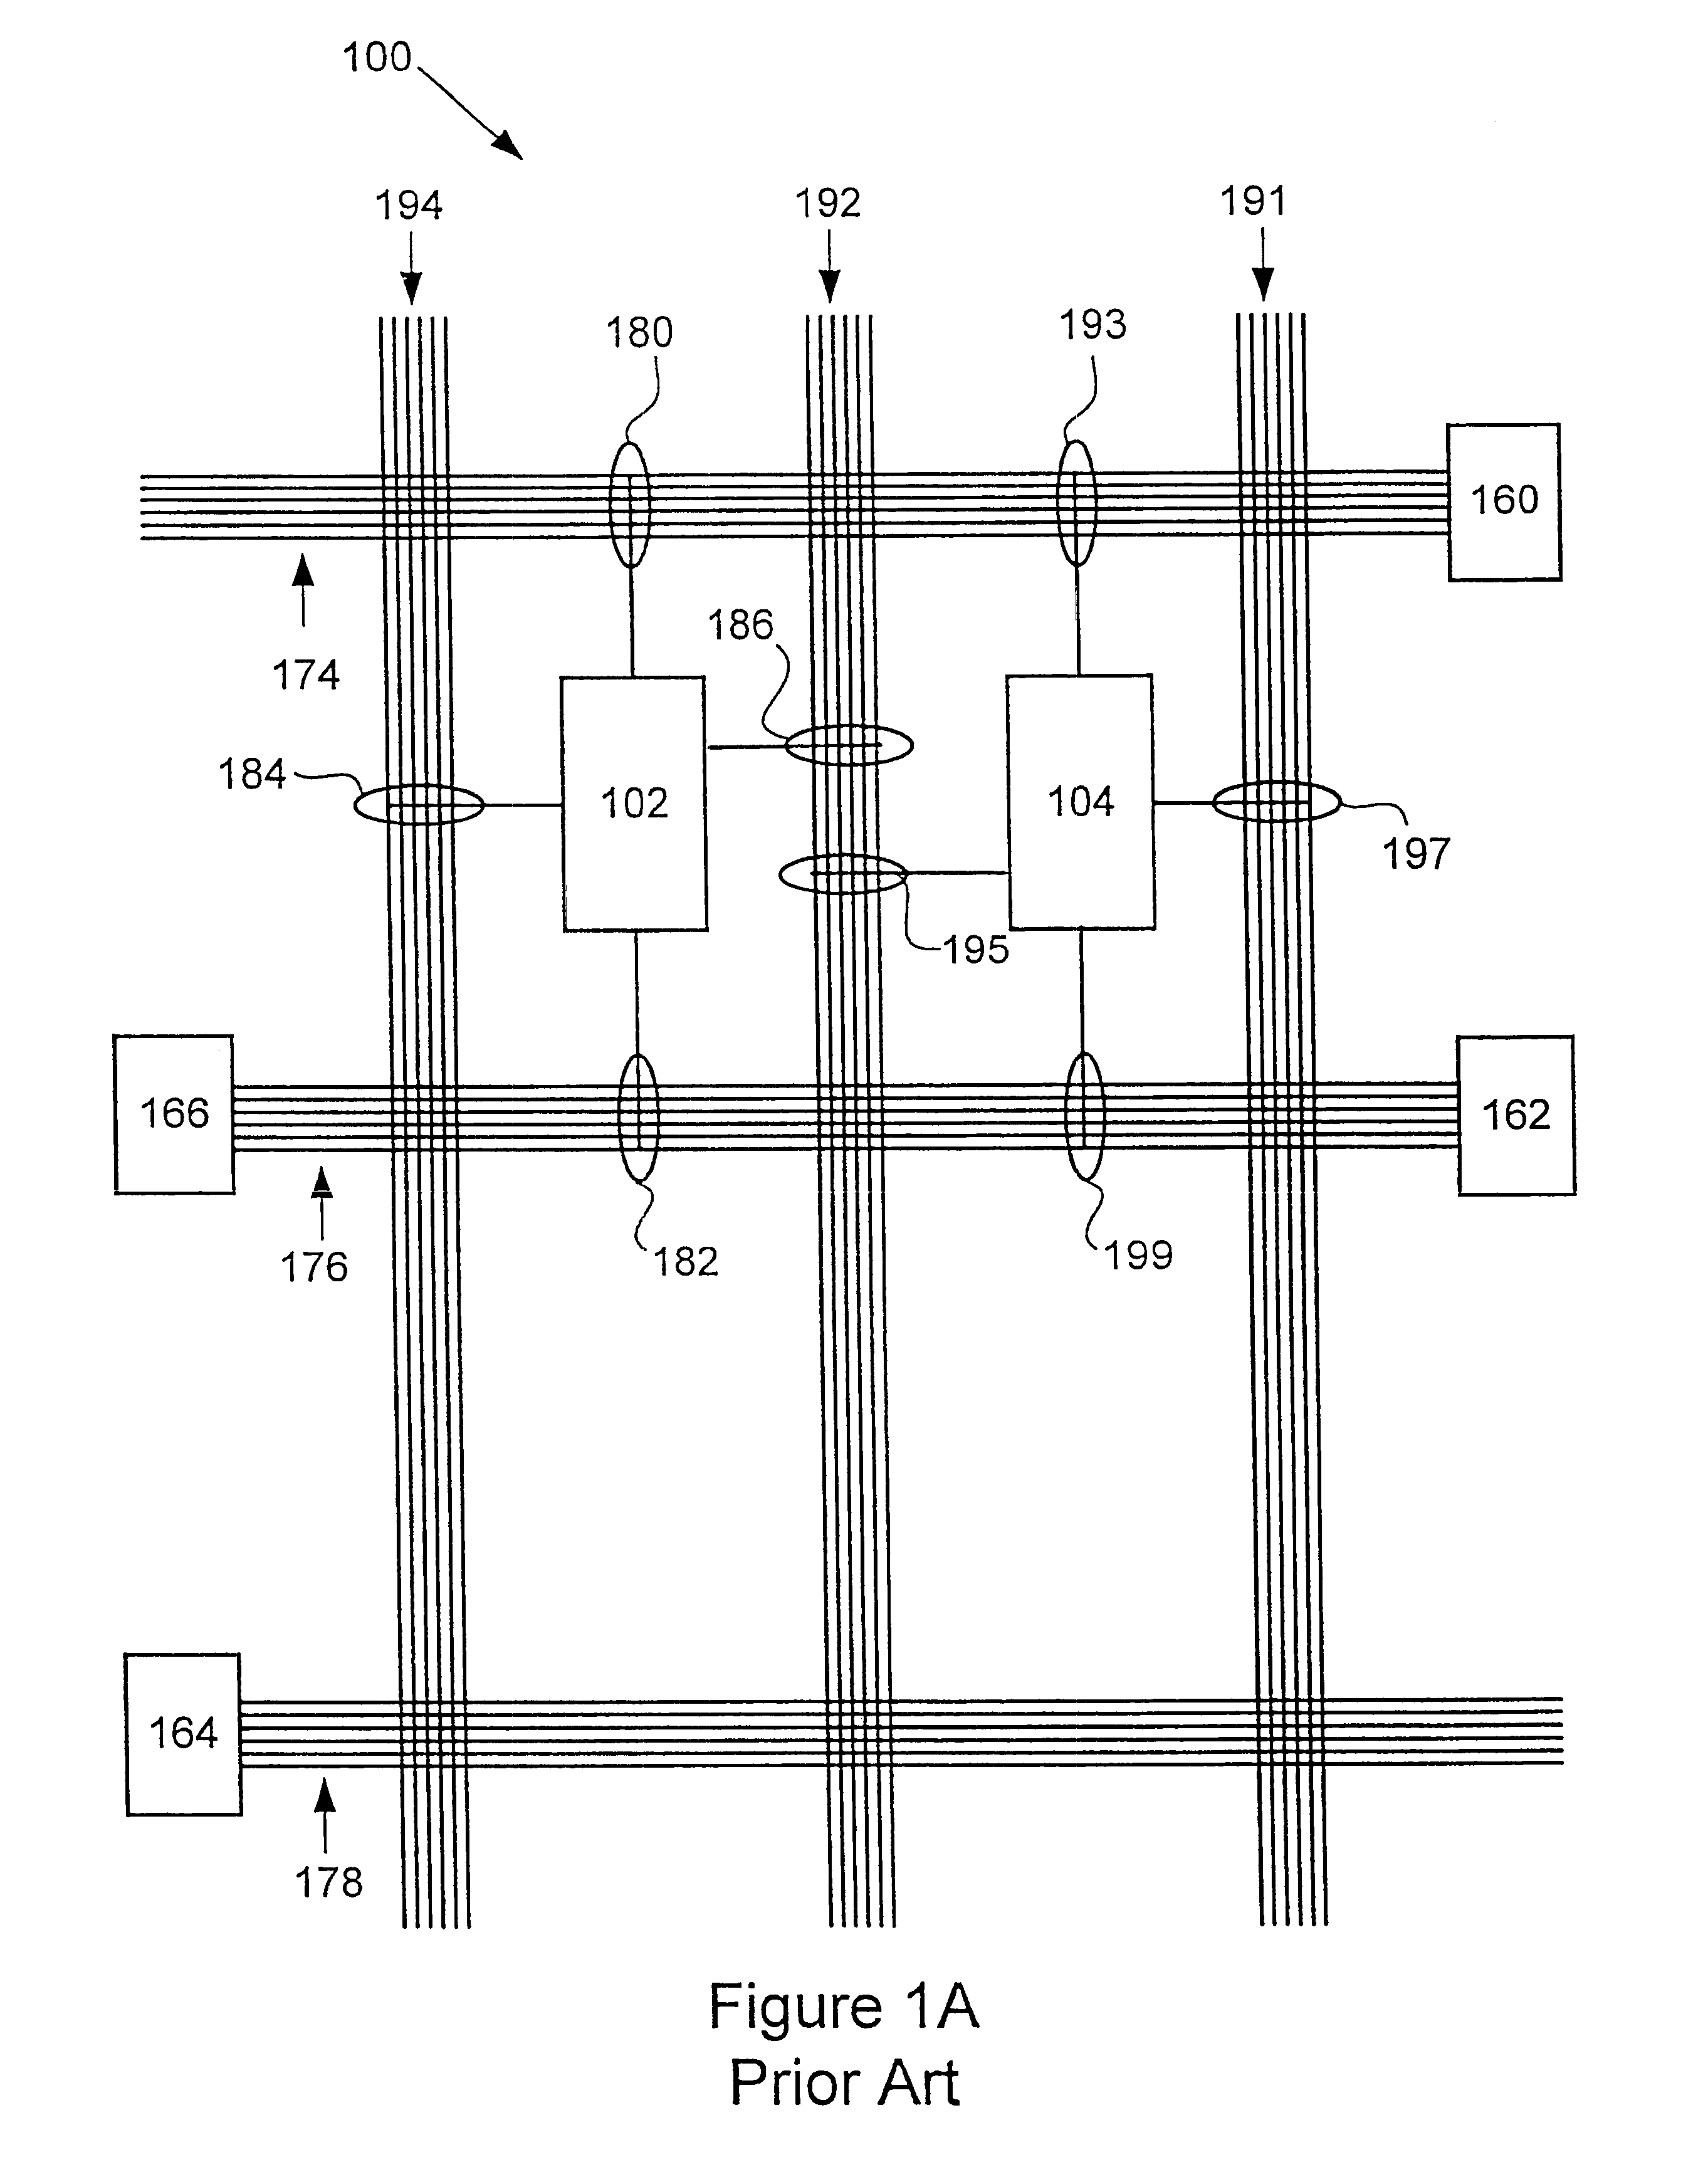 Integrated circuit incorporating a programmable cross-bar switch